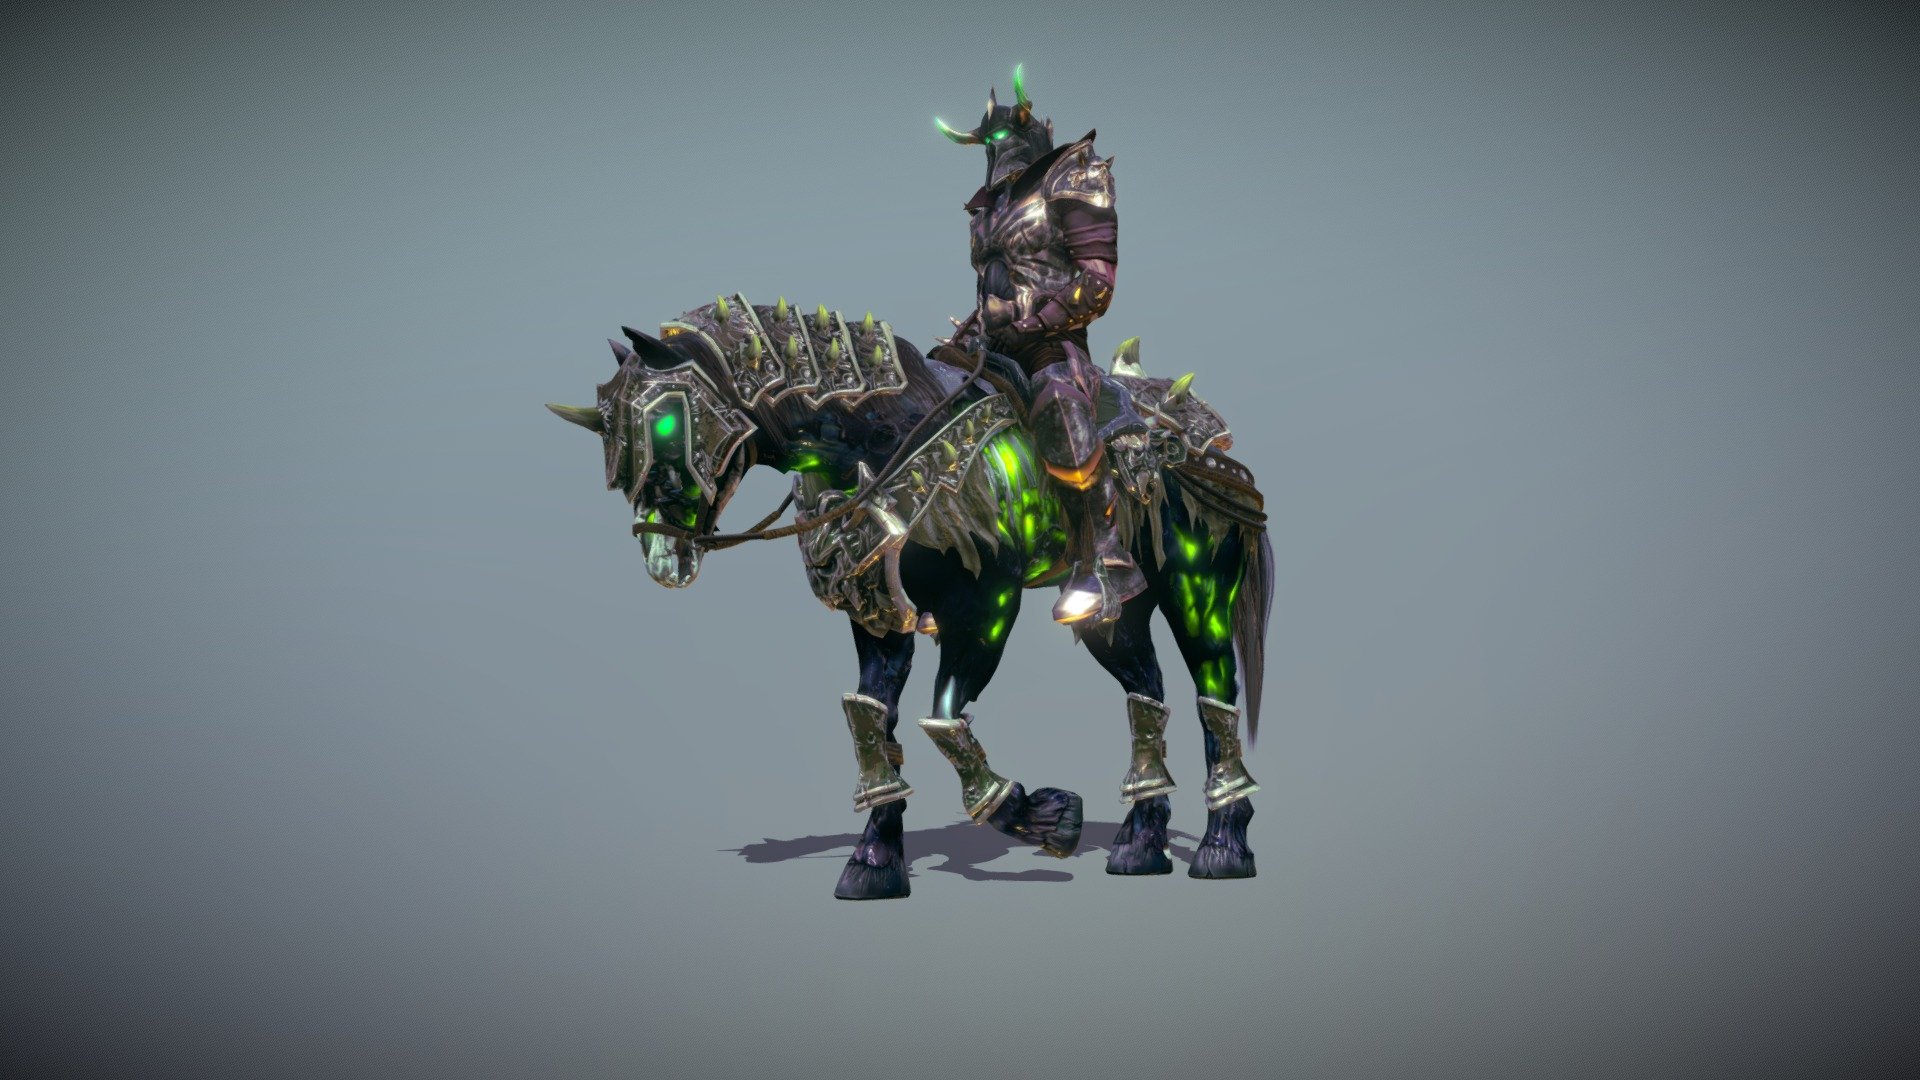 Check all the Images here:

https://imgur.com/gallery/aHM5qMG
 

 https://vimeo.com/420078445 



Become the Unholy Knight with his trustful undead steed

Add-on for Horse Animset Pro Unity
It is highly recommended to have HAP in your project to use all the features the Riding system has
⚠Without Horse Animset, the Asset has only models, Animations and Textures




Styles: Realistic, HandPainted (Toon), Poly Art

Custom Amplify Shader for Poly Art Style

Fire, Toxic, Ice and Rotten Meat textures

ADDITIONAL LICENSE

The following custom license applies to this asset in addition to the EULA.

END USER will be prohibited from using the asset license for the following products:




Creation &amp; Trading of Non-Fungible-Tokens (NFT) and/or use in Blockchain-based projects or products.

Creation of content for Metaverse related and/or Game creation software and products.

3D printing for commercial use.

Remix, transform or build upon the material, and re-sell the modified material.
 - Undead Horse & Unholy Knight - Buy Royalty Free 3D model by Malbers Animations (@malbers.shark87) 3d model